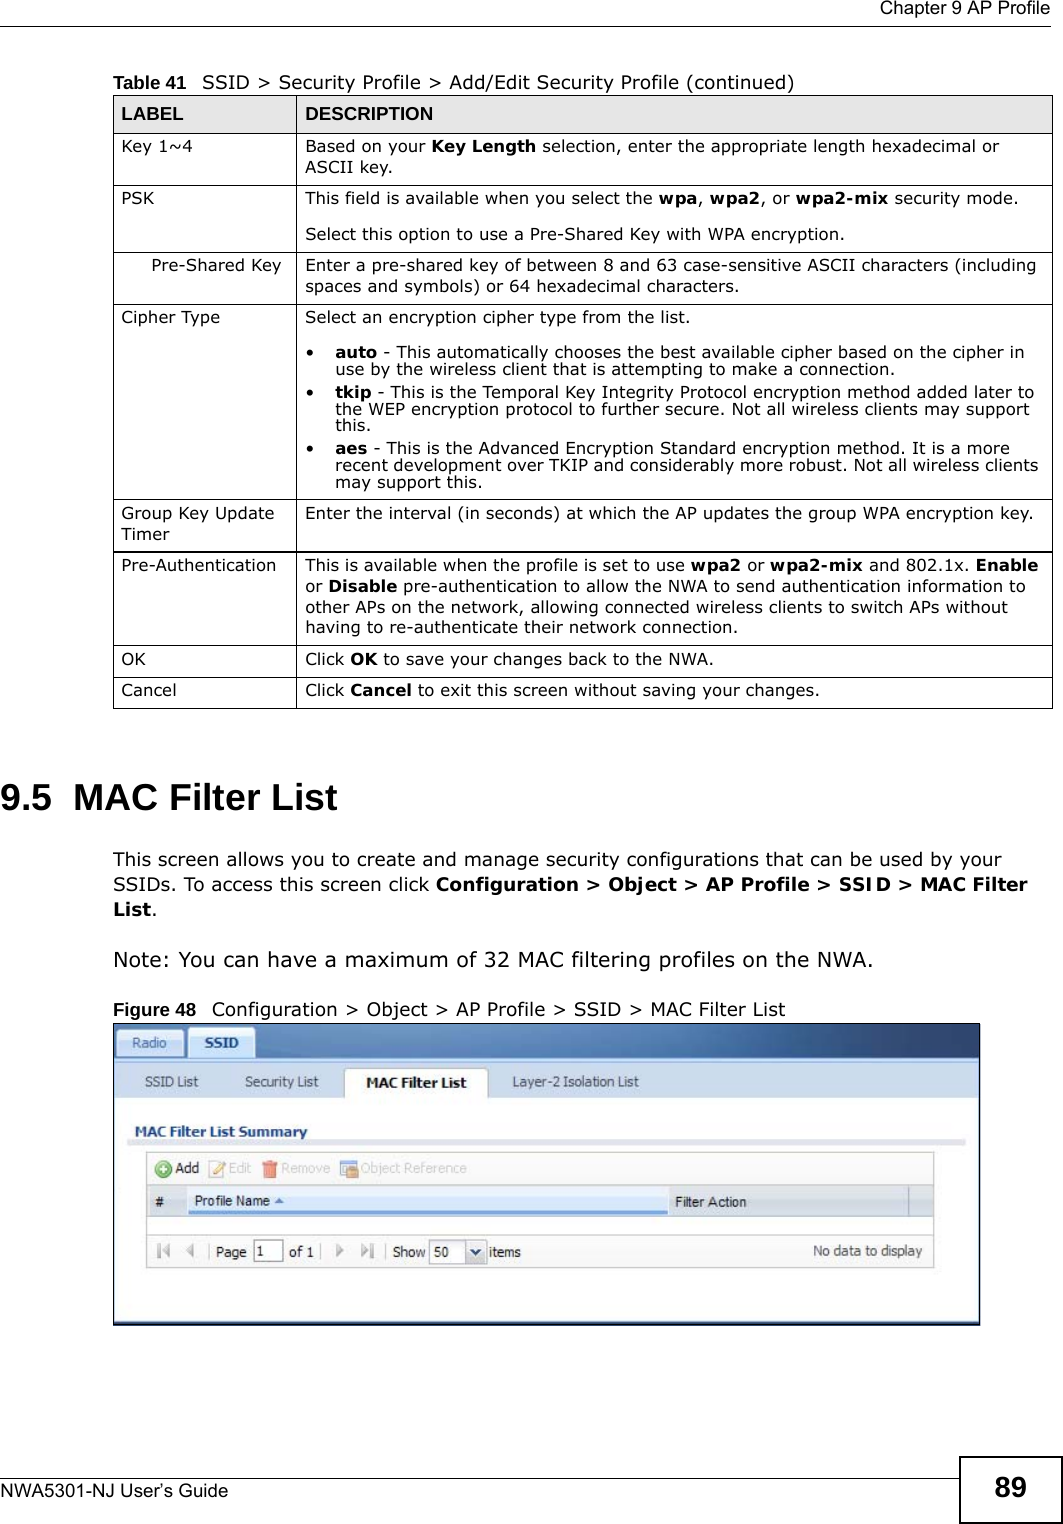  Chapter 9 AP ProfileNWA5301-NJ User’s Guide 899.5  MAC Filter ListThis screen allows you to create and manage security configurations that can be used by your SSIDs. To access this screen click Configuration &gt; Object &gt; AP Profile &gt; SSID &gt; MAC Filter List.Note: You can have a maximum of 32 MAC filtering profiles on the NWA.Figure 48   Configuration &gt; Object &gt; AP Profile &gt; SSID &gt; MAC Filter ListKey 1~4 Based on your Key Length selection, enter the appropriate length hexadecimal or ASCII key.PSK This field is available when you select the wpa, wpa2, or wpa2-mix security mode.Select this option to use a Pre-Shared Key with WPA encryption.Pre-Shared Key Enter a pre-shared key of between 8 and 63 case-sensitive ASCII characters (including spaces and symbols) or 64 hexadecimal characters.Cipher Type Select an encryption cipher type from the list. •auto - This automatically chooses the best available cipher based on the cipher in use by the wireless client that is attempting to make a connection.•tkip - This is the Temporal Key Integrity Protocol encryption method added later to the WEP encryption protocol to further secure. Not all wireless clients may support this.•aes - This is the Advanced Encryption Standard encryption method. It is a more recent development over TKIP and considerably more robust. Not all wireless clients may support this.Group Key Update TimerEnter the interval (in seconds) at which the AP updates the group WPA encryption key.Pre-Authentication This is available when the profile is set to use wpa2 or wpa2-mix and 802.1x. Enable or Disable pre-authentication to allow the NWA to send authentication information to other APs on the network, allowing connected wireless clients to switch APs without having to re-authenticate their network connection.OK Click OK to save your changes back to the NWA.Cancel Click Cancel to exit this screen without saving your changes.Table 41   SSID &gt; Security Profile &gt; Add/Edit Security Profile (continued)LABEL DESCRIPTION